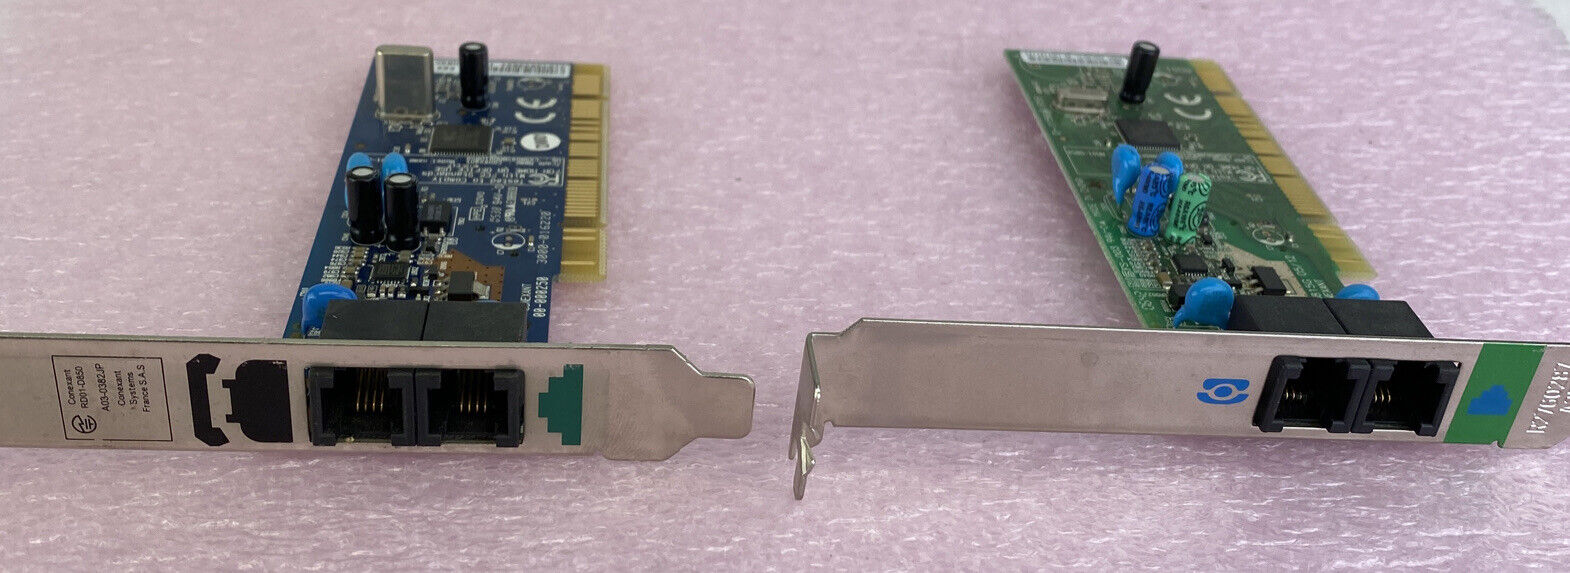 Lot of 2 Conexant RD01-D850 56k fax modem PCI cards 0JF495 0N8507